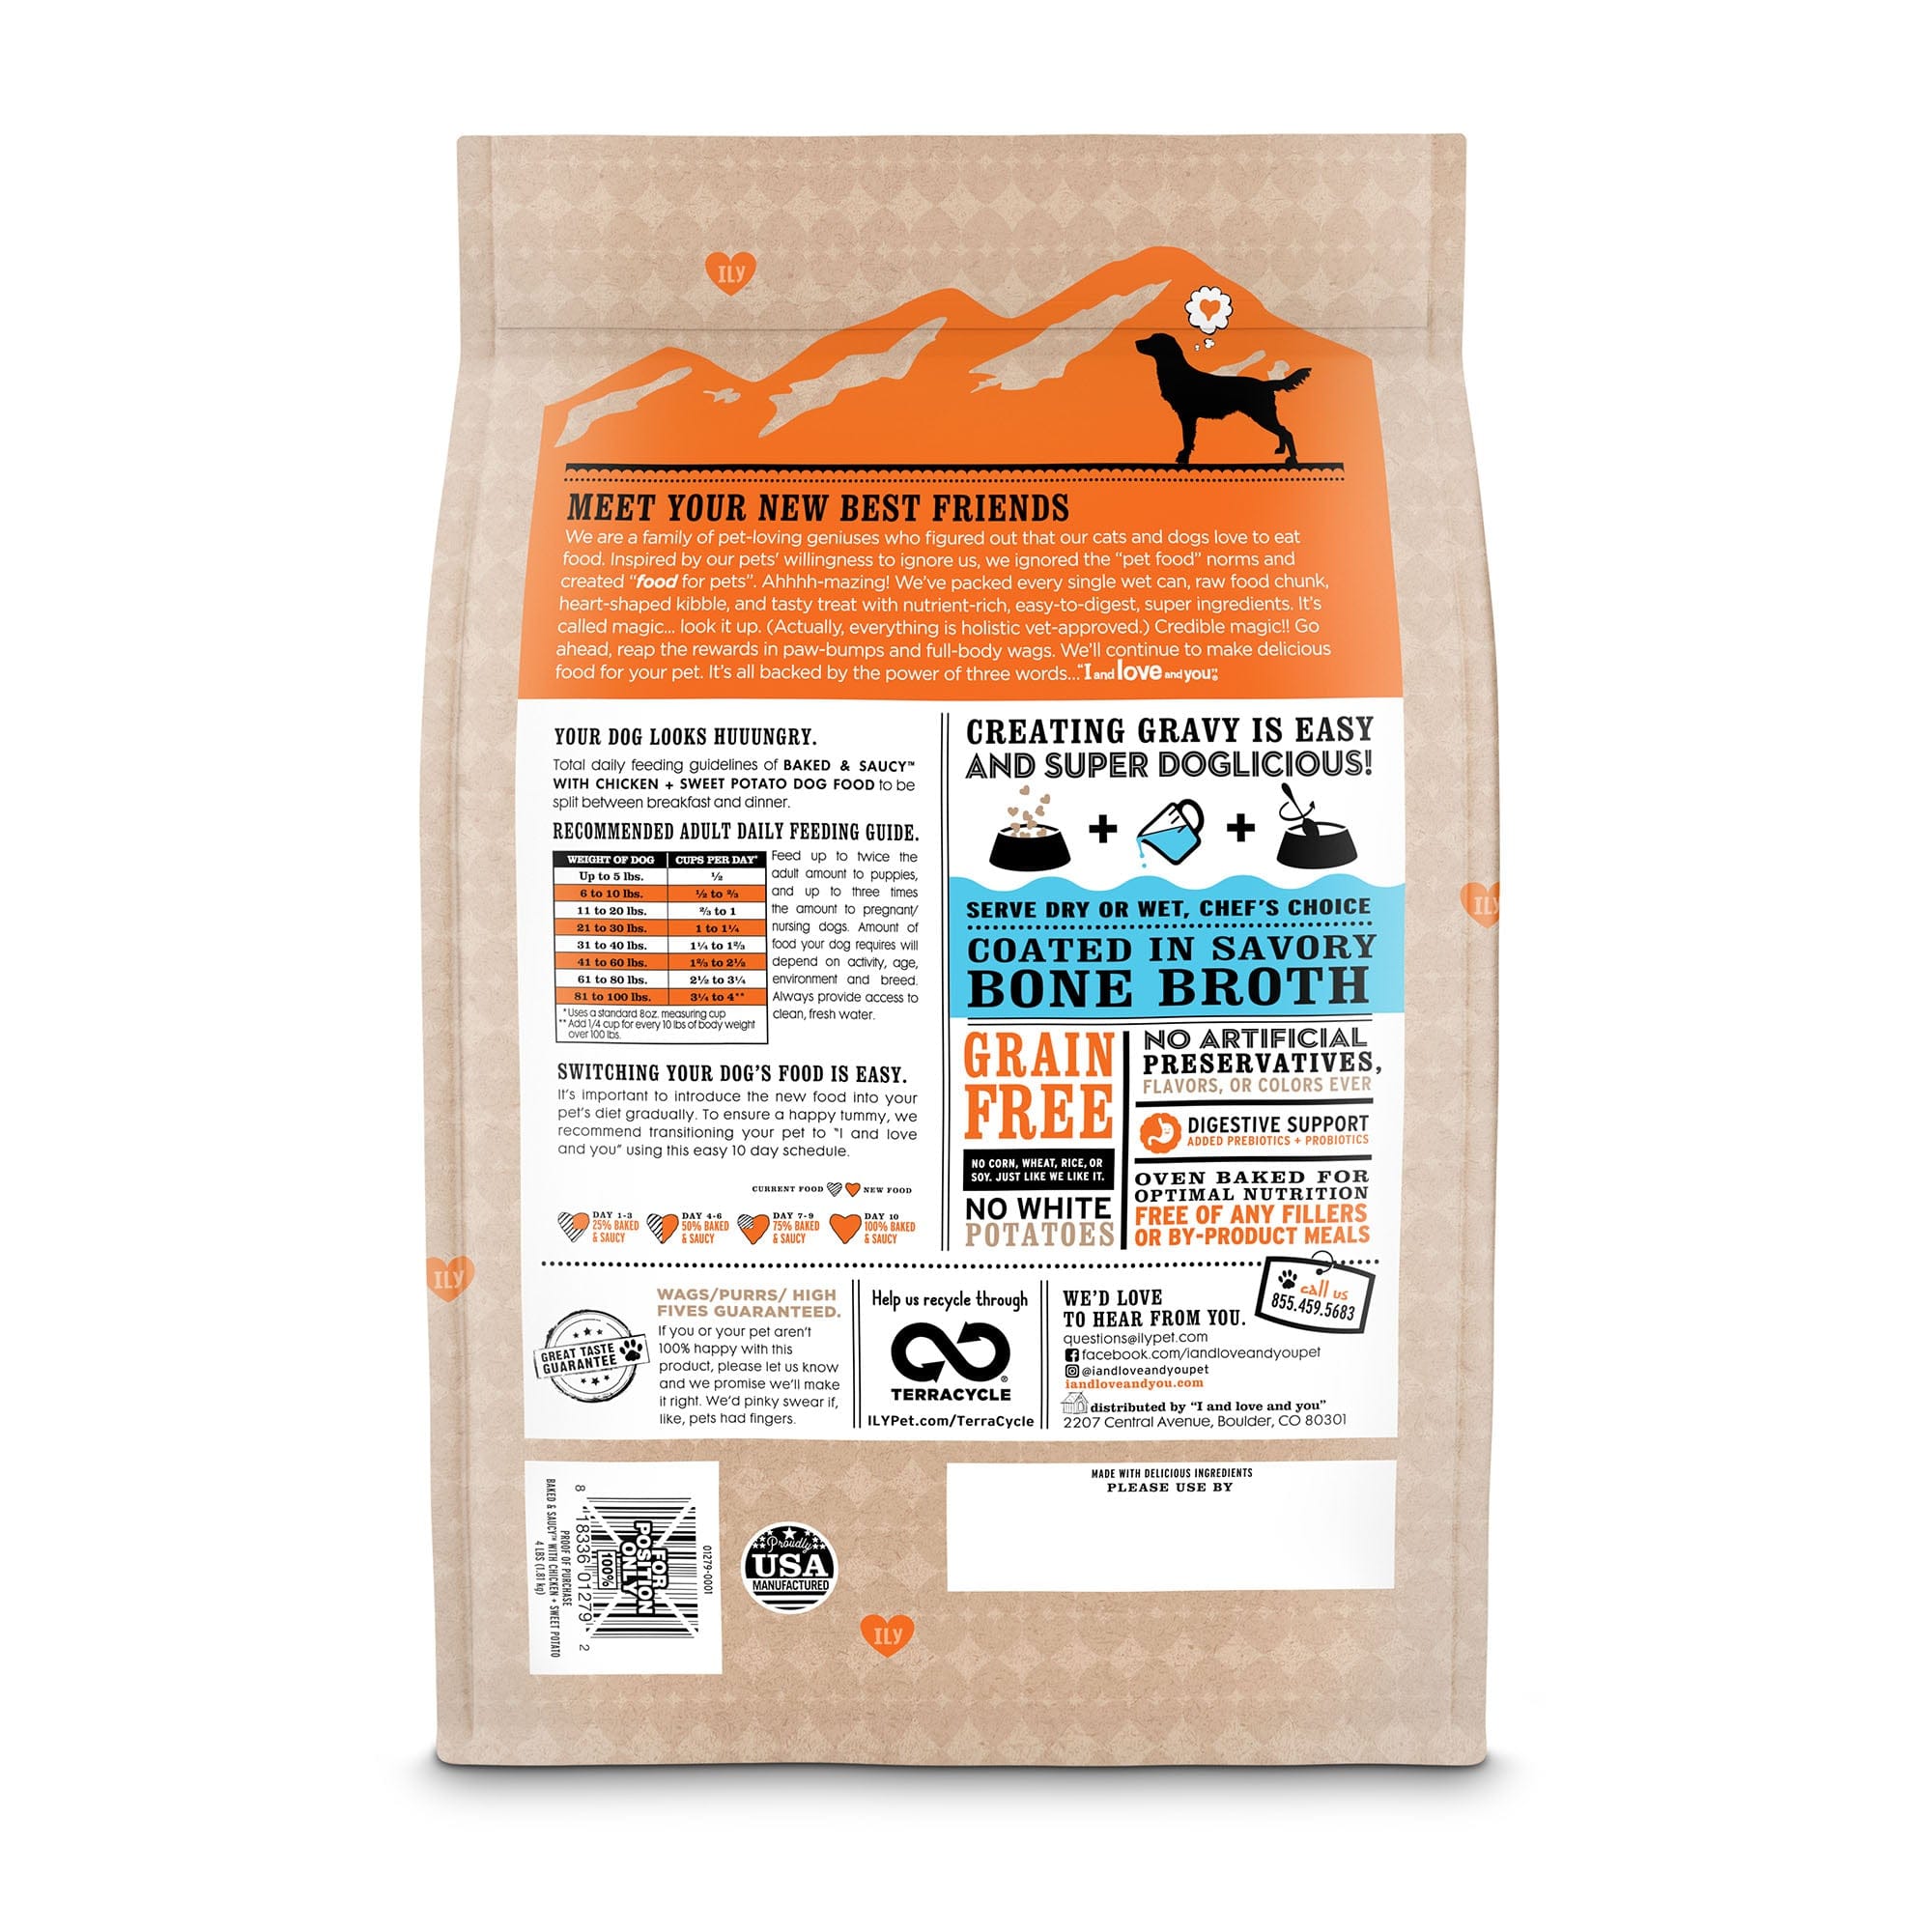 Heart-shaped kibble coated in bone broth, made with USA farm-raised chicken and sweet potato, with a bag of dog food and a silhouette of a dog.